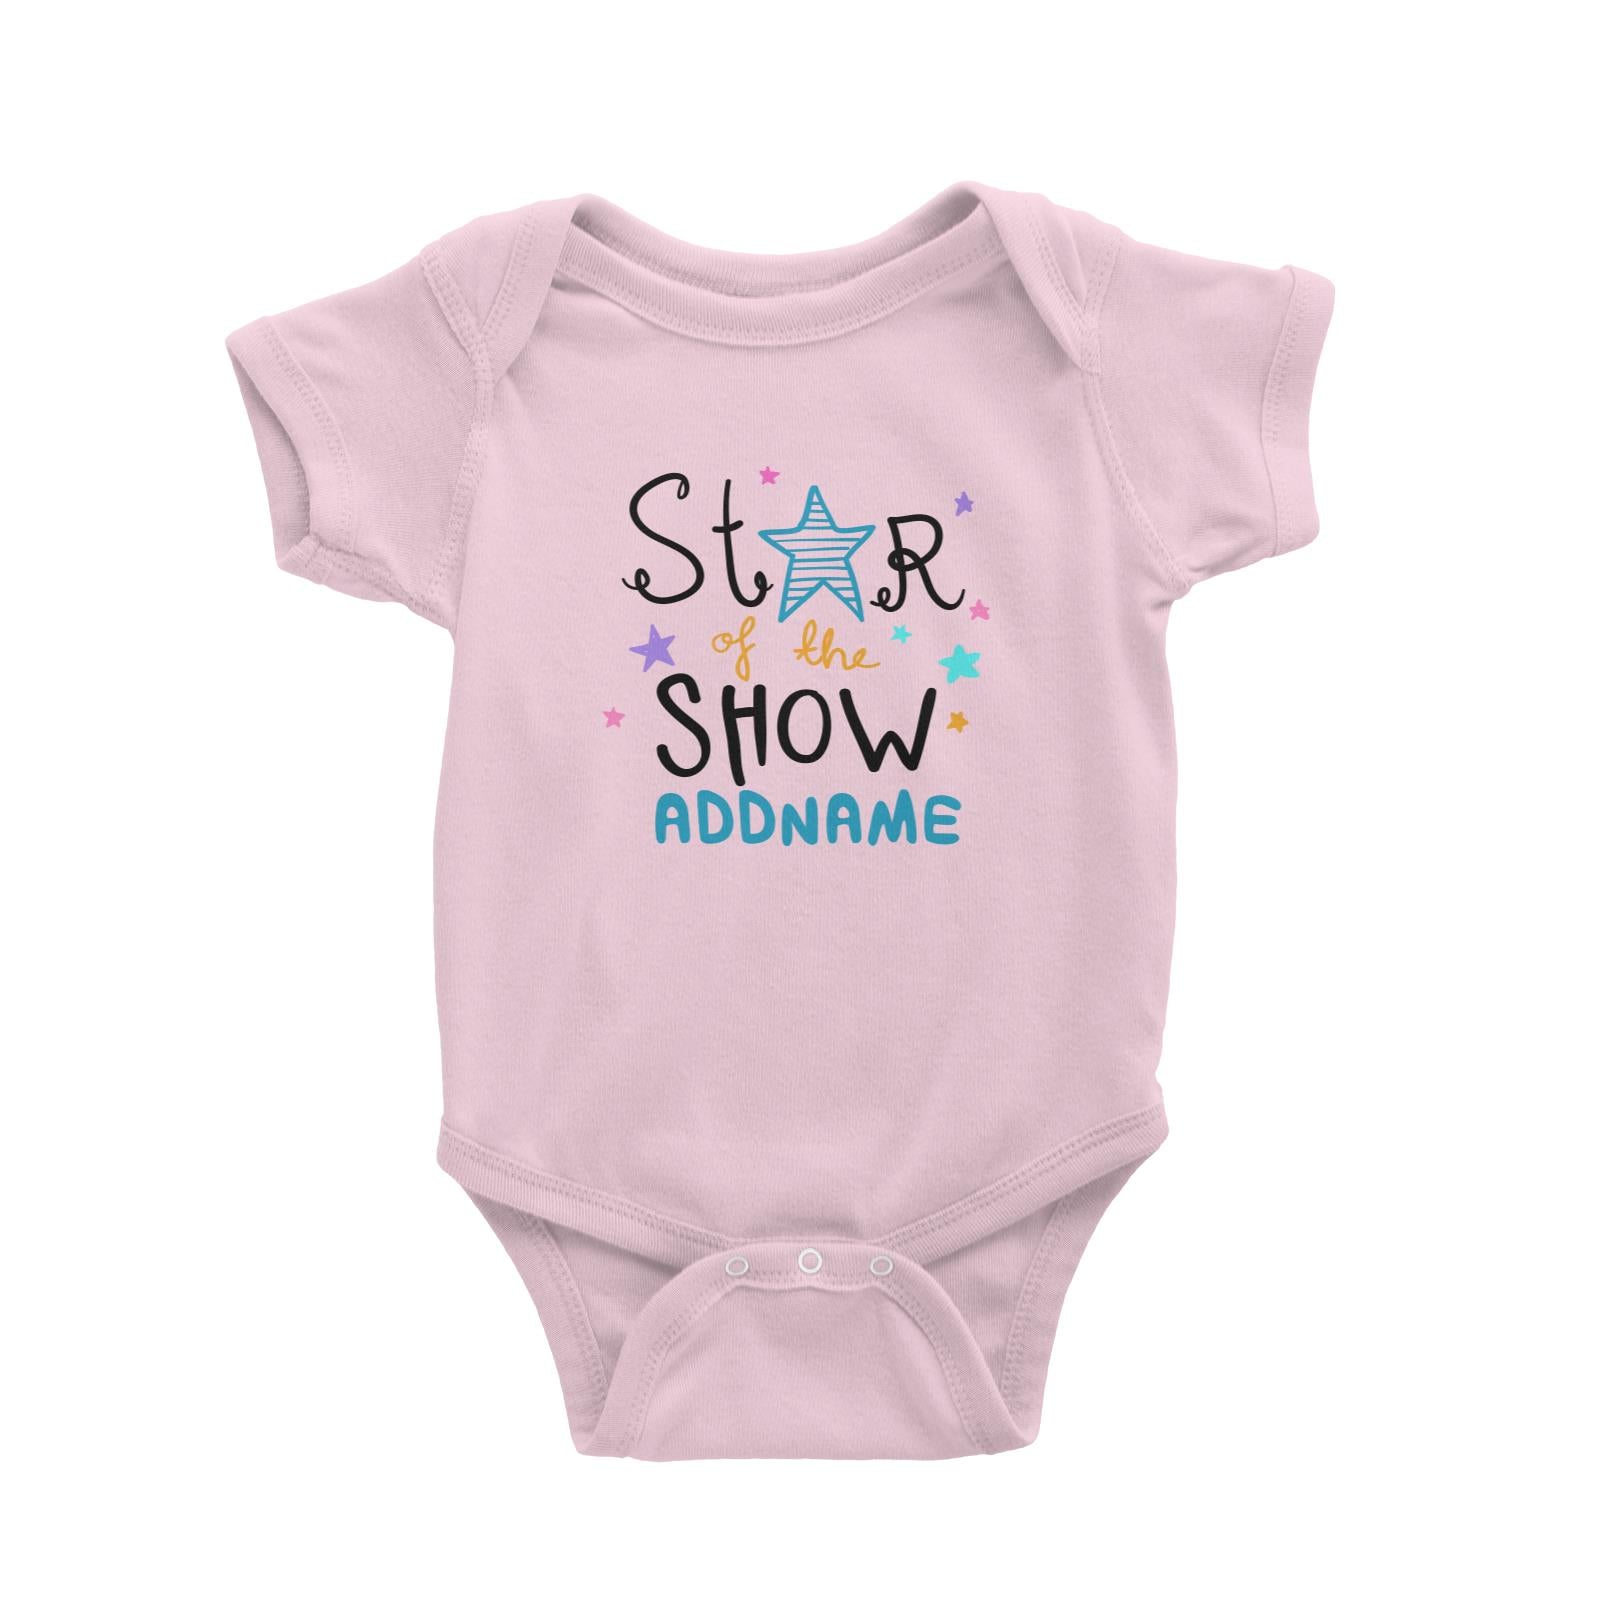 Children's Day Gift Series Star Of The Show Blue Addname Baby Romper